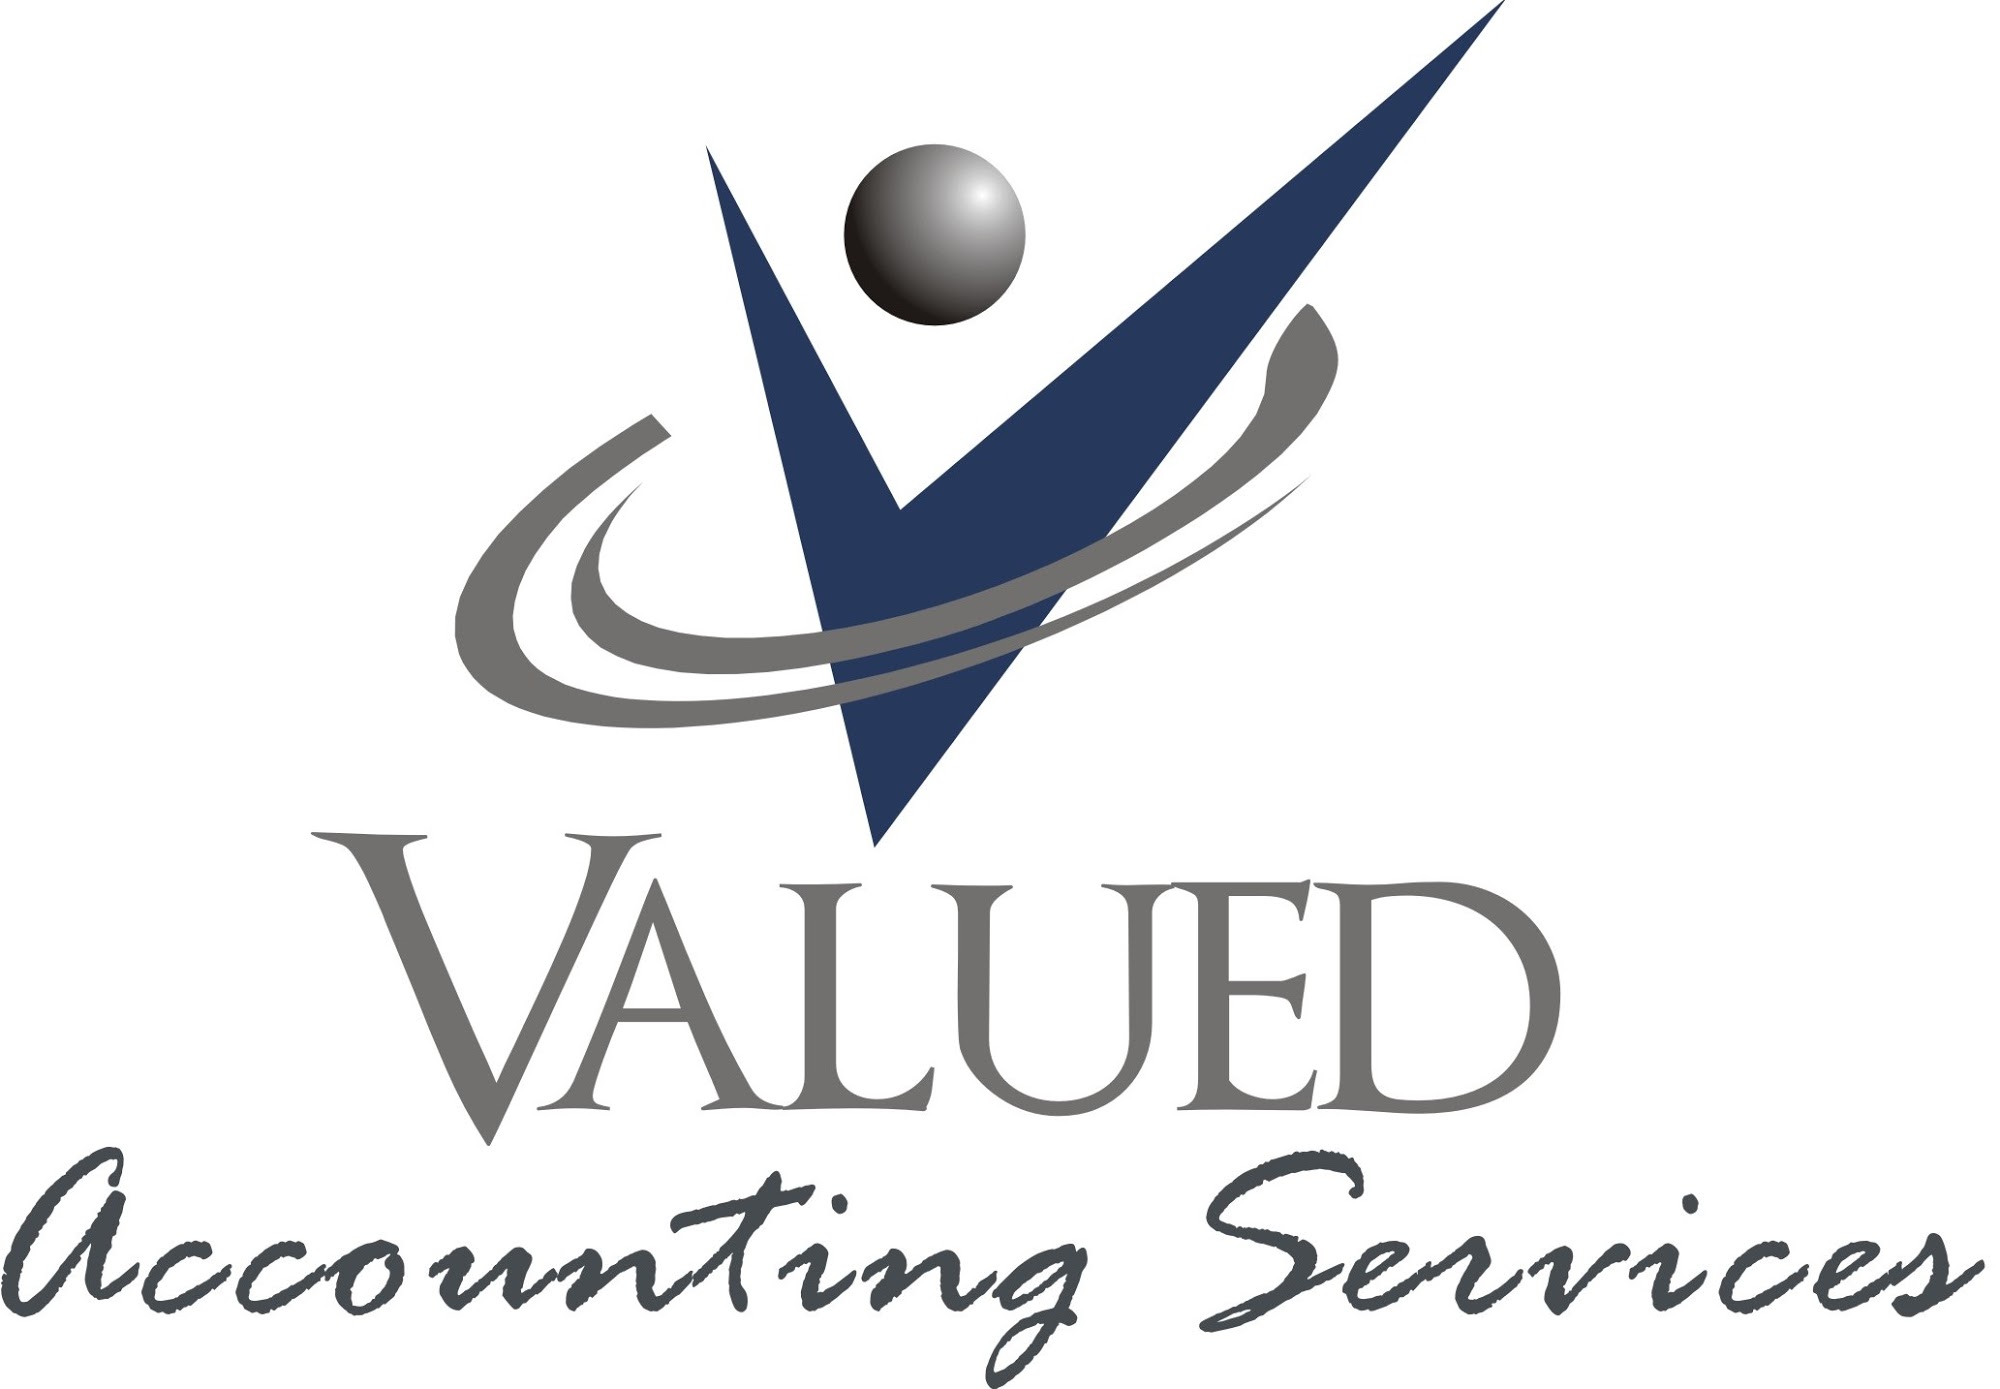 Valued Accounting Services